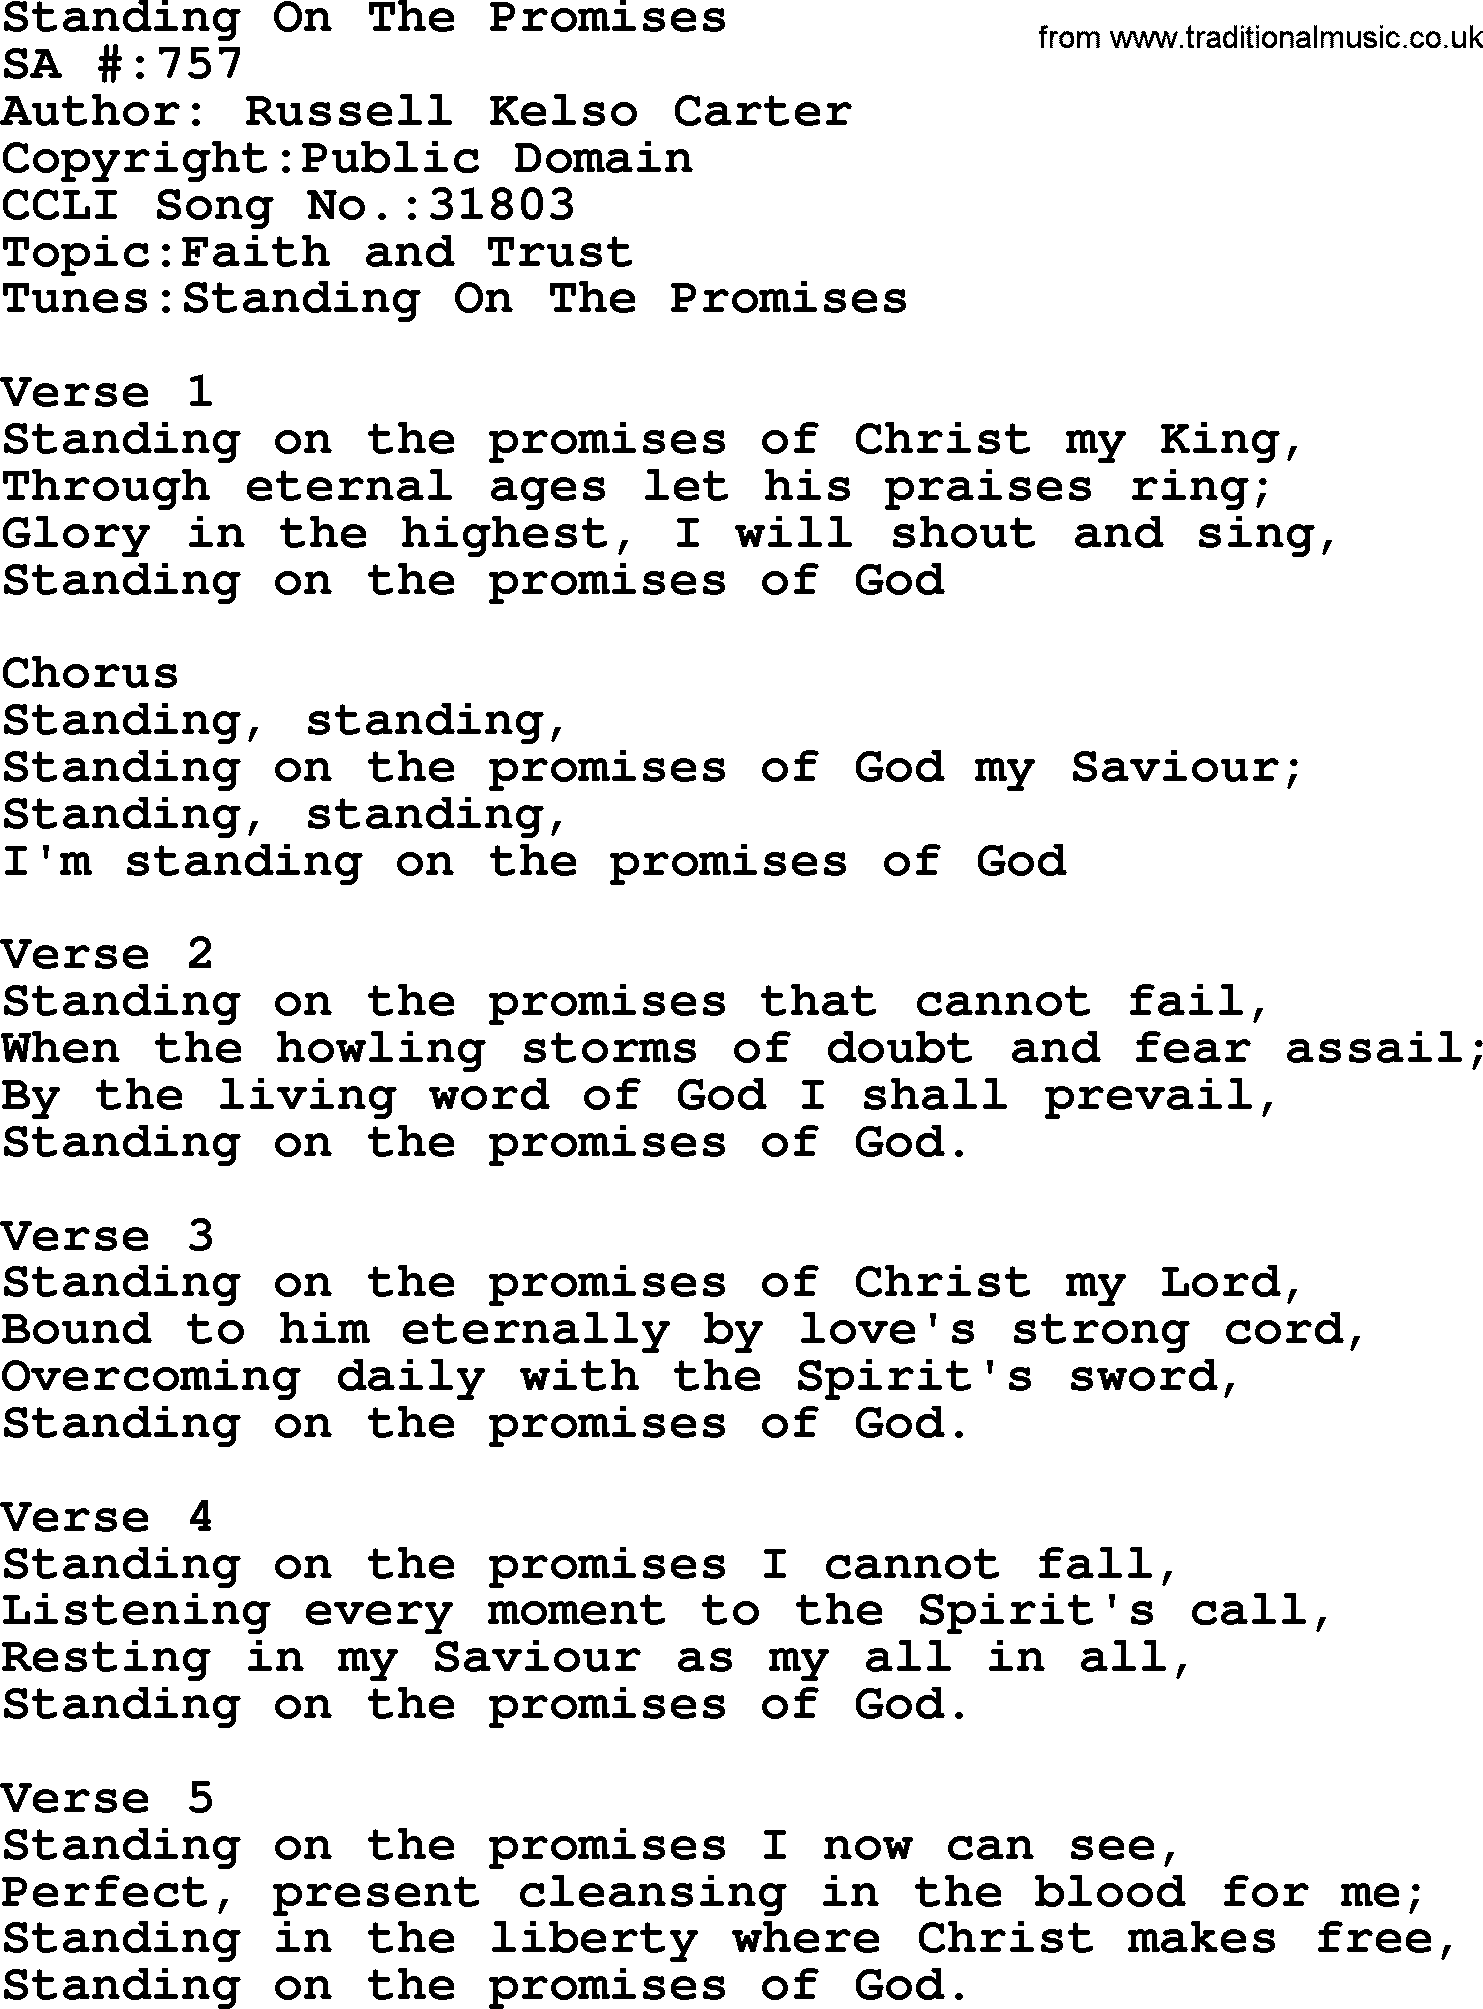 Salvation Army Hymnal, title: Standing On The Promises, with lyrics and PDF,